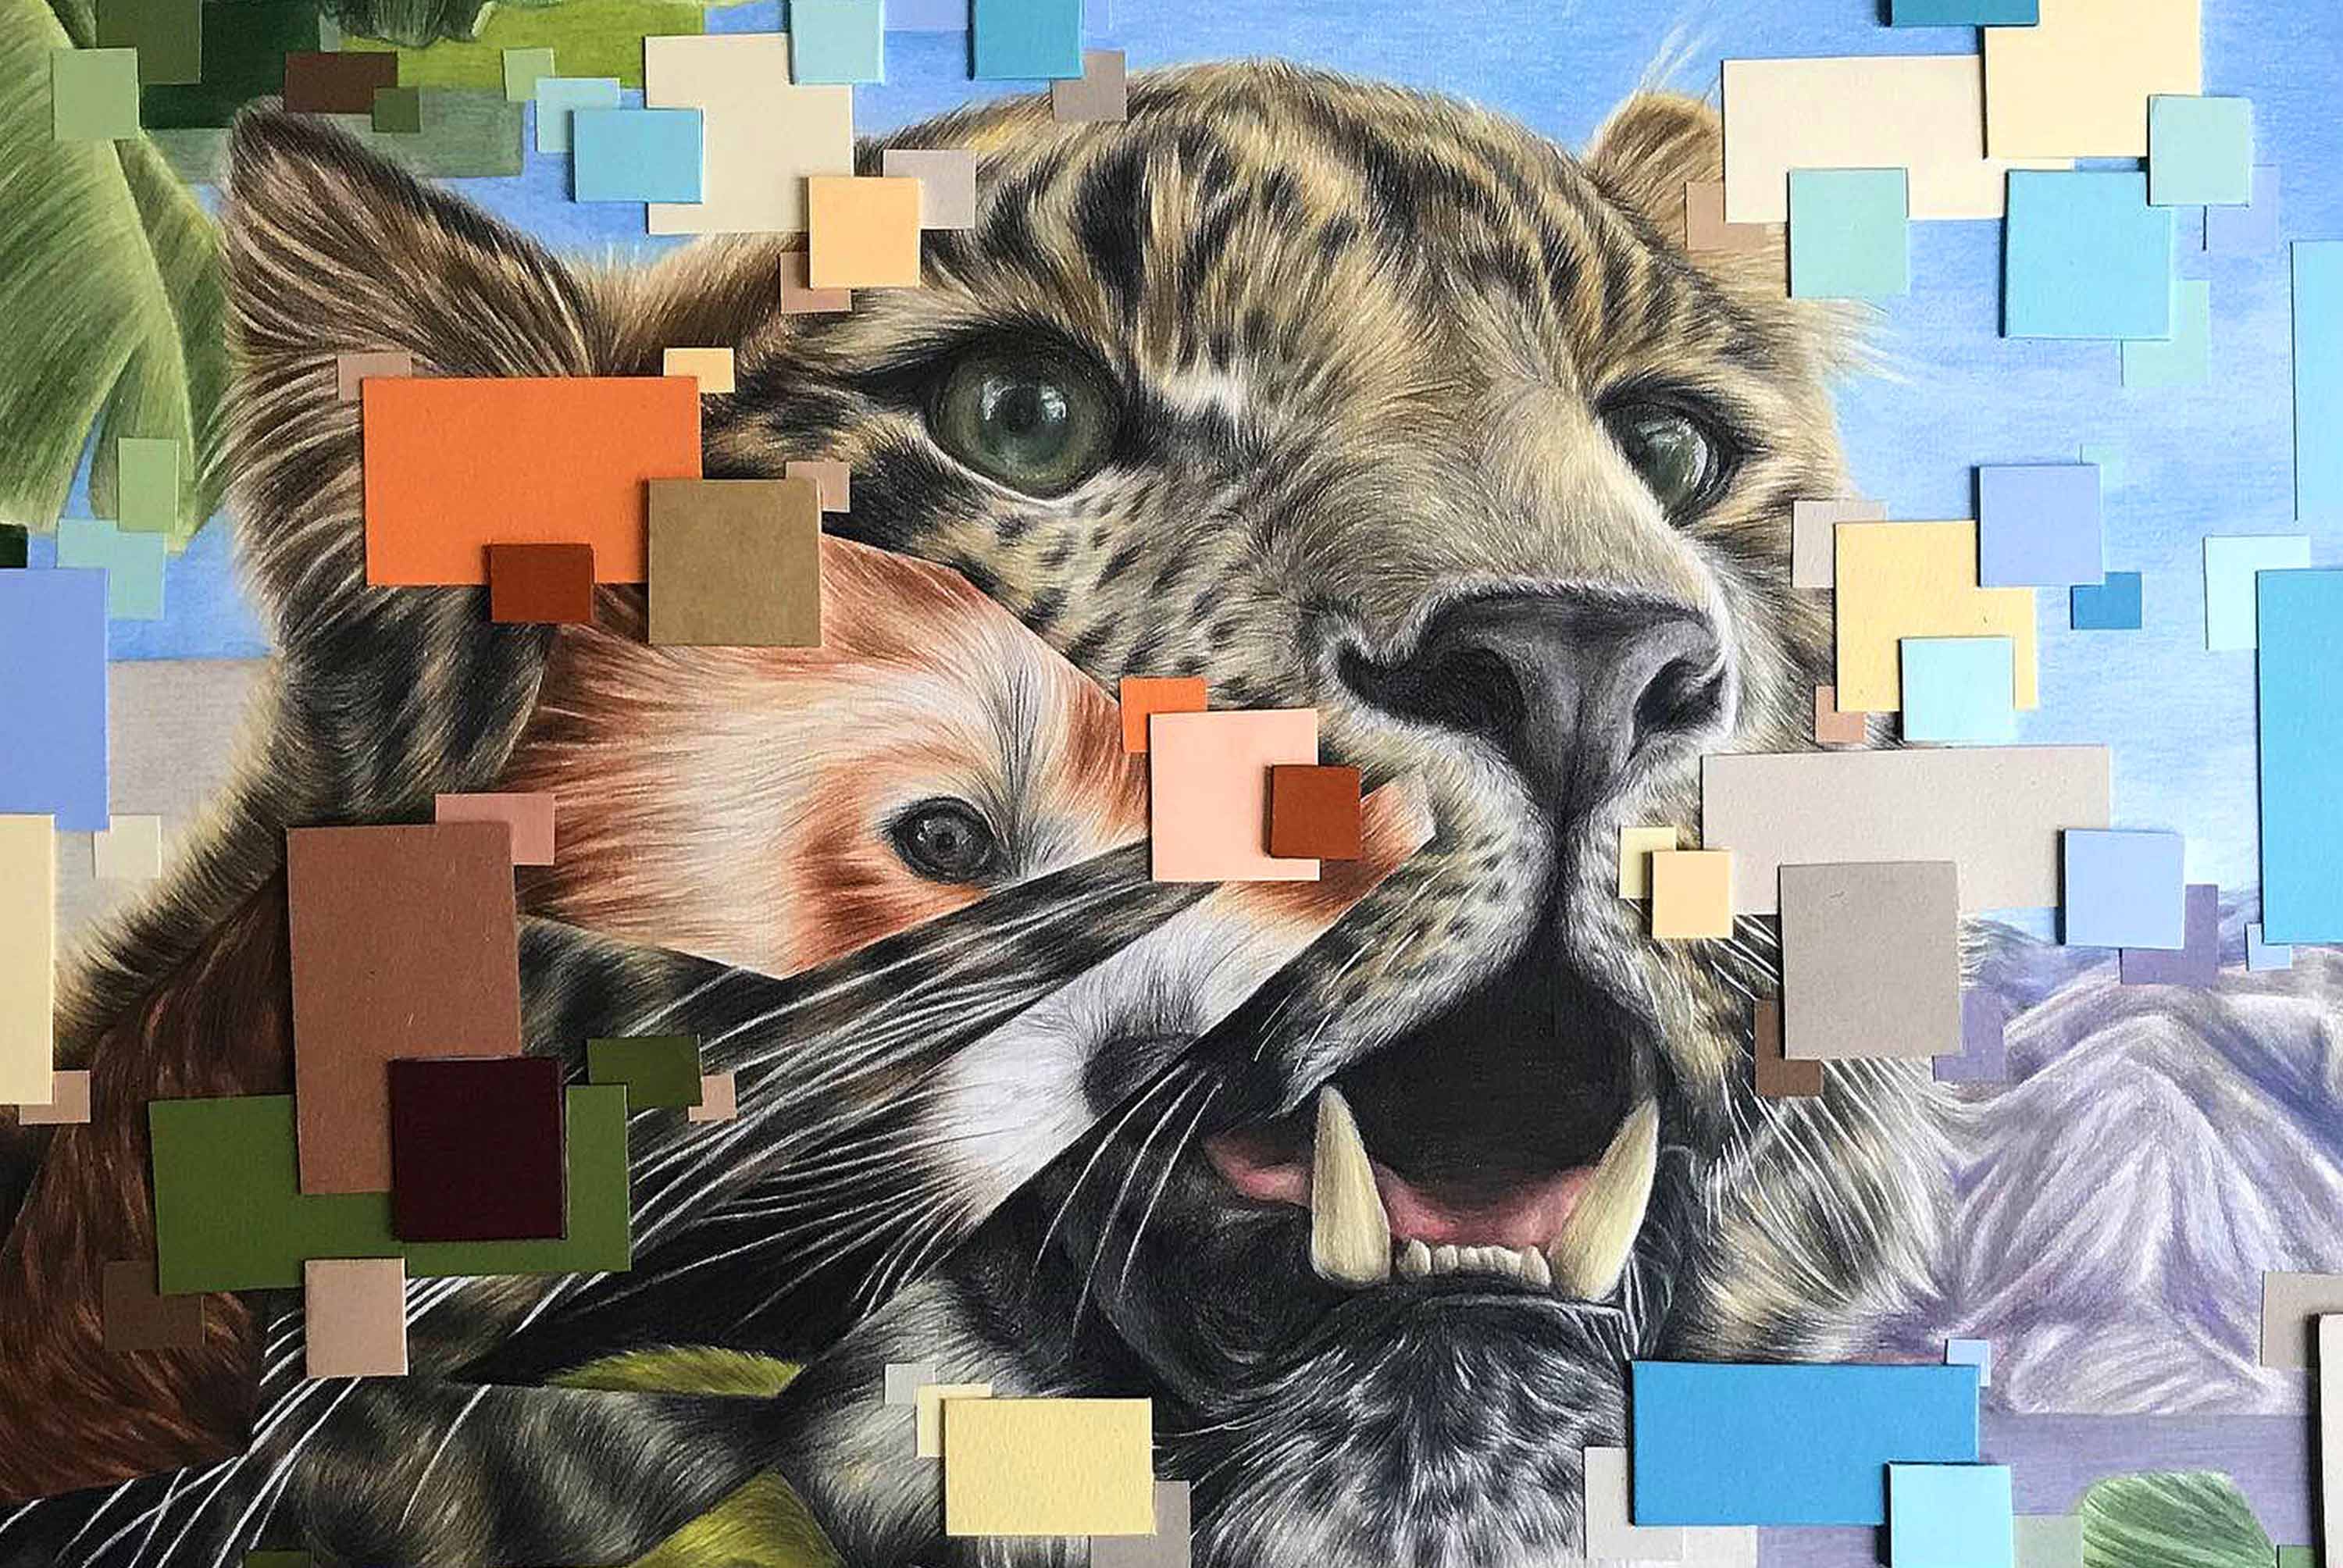 Evolution final piece. Coloured pencil drawing of leopard face with red panda, tropical Amakihi bird and layered 3D pixels collaged into face